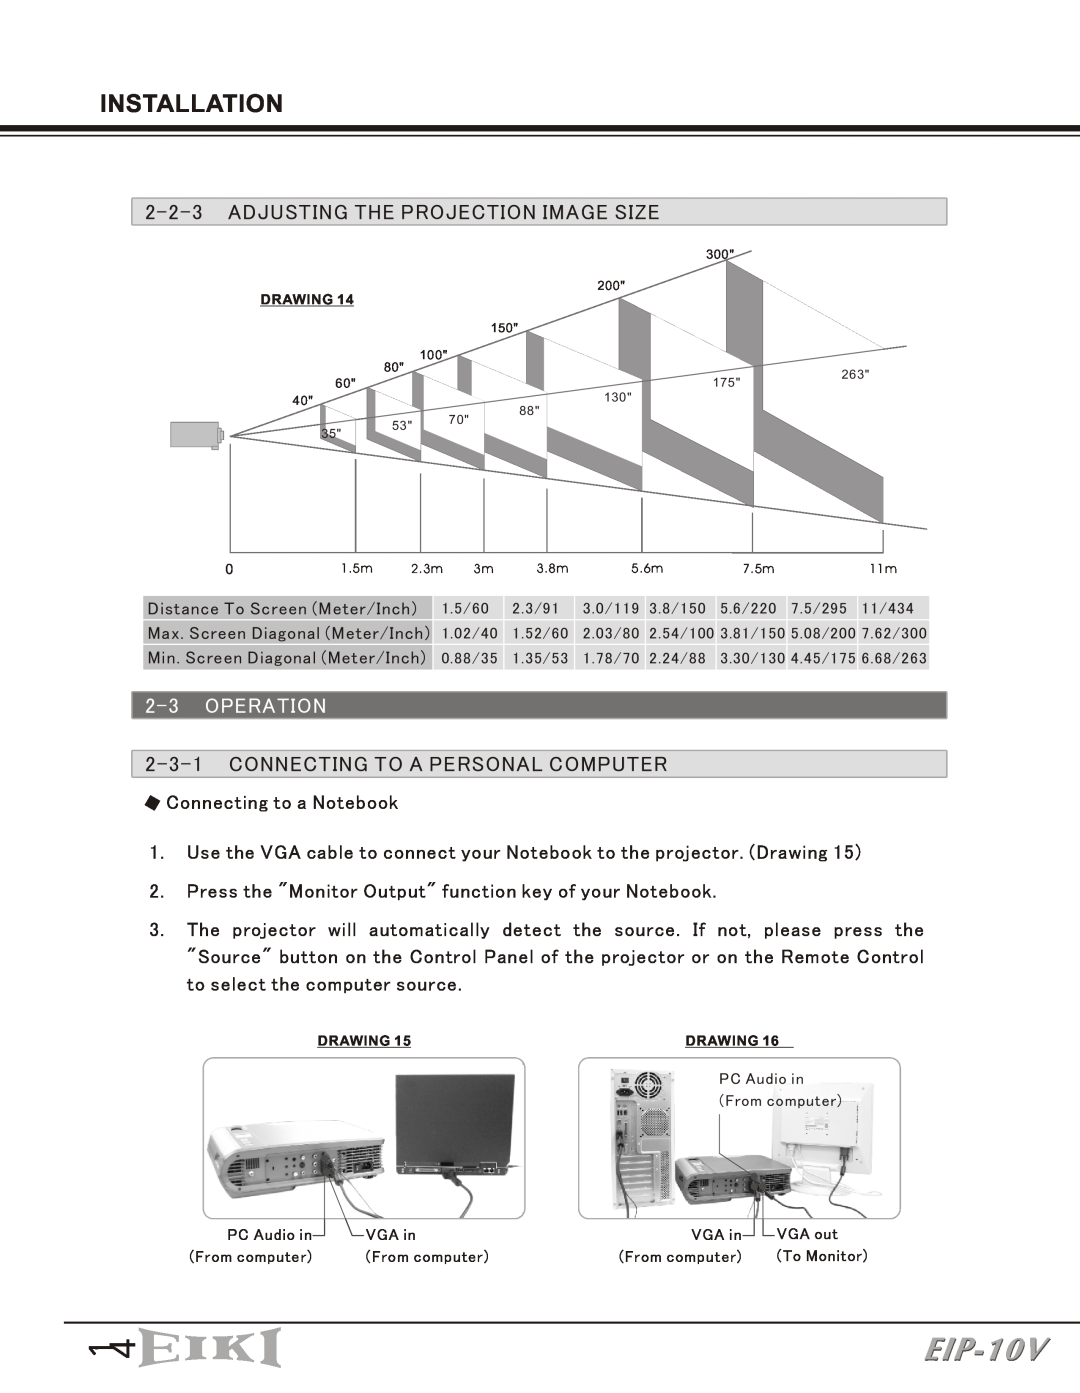 Eiki EIP-10V owner manual Adjusting The Projection Image Size, Operation, Connecting To A Personal Computer, Installation 